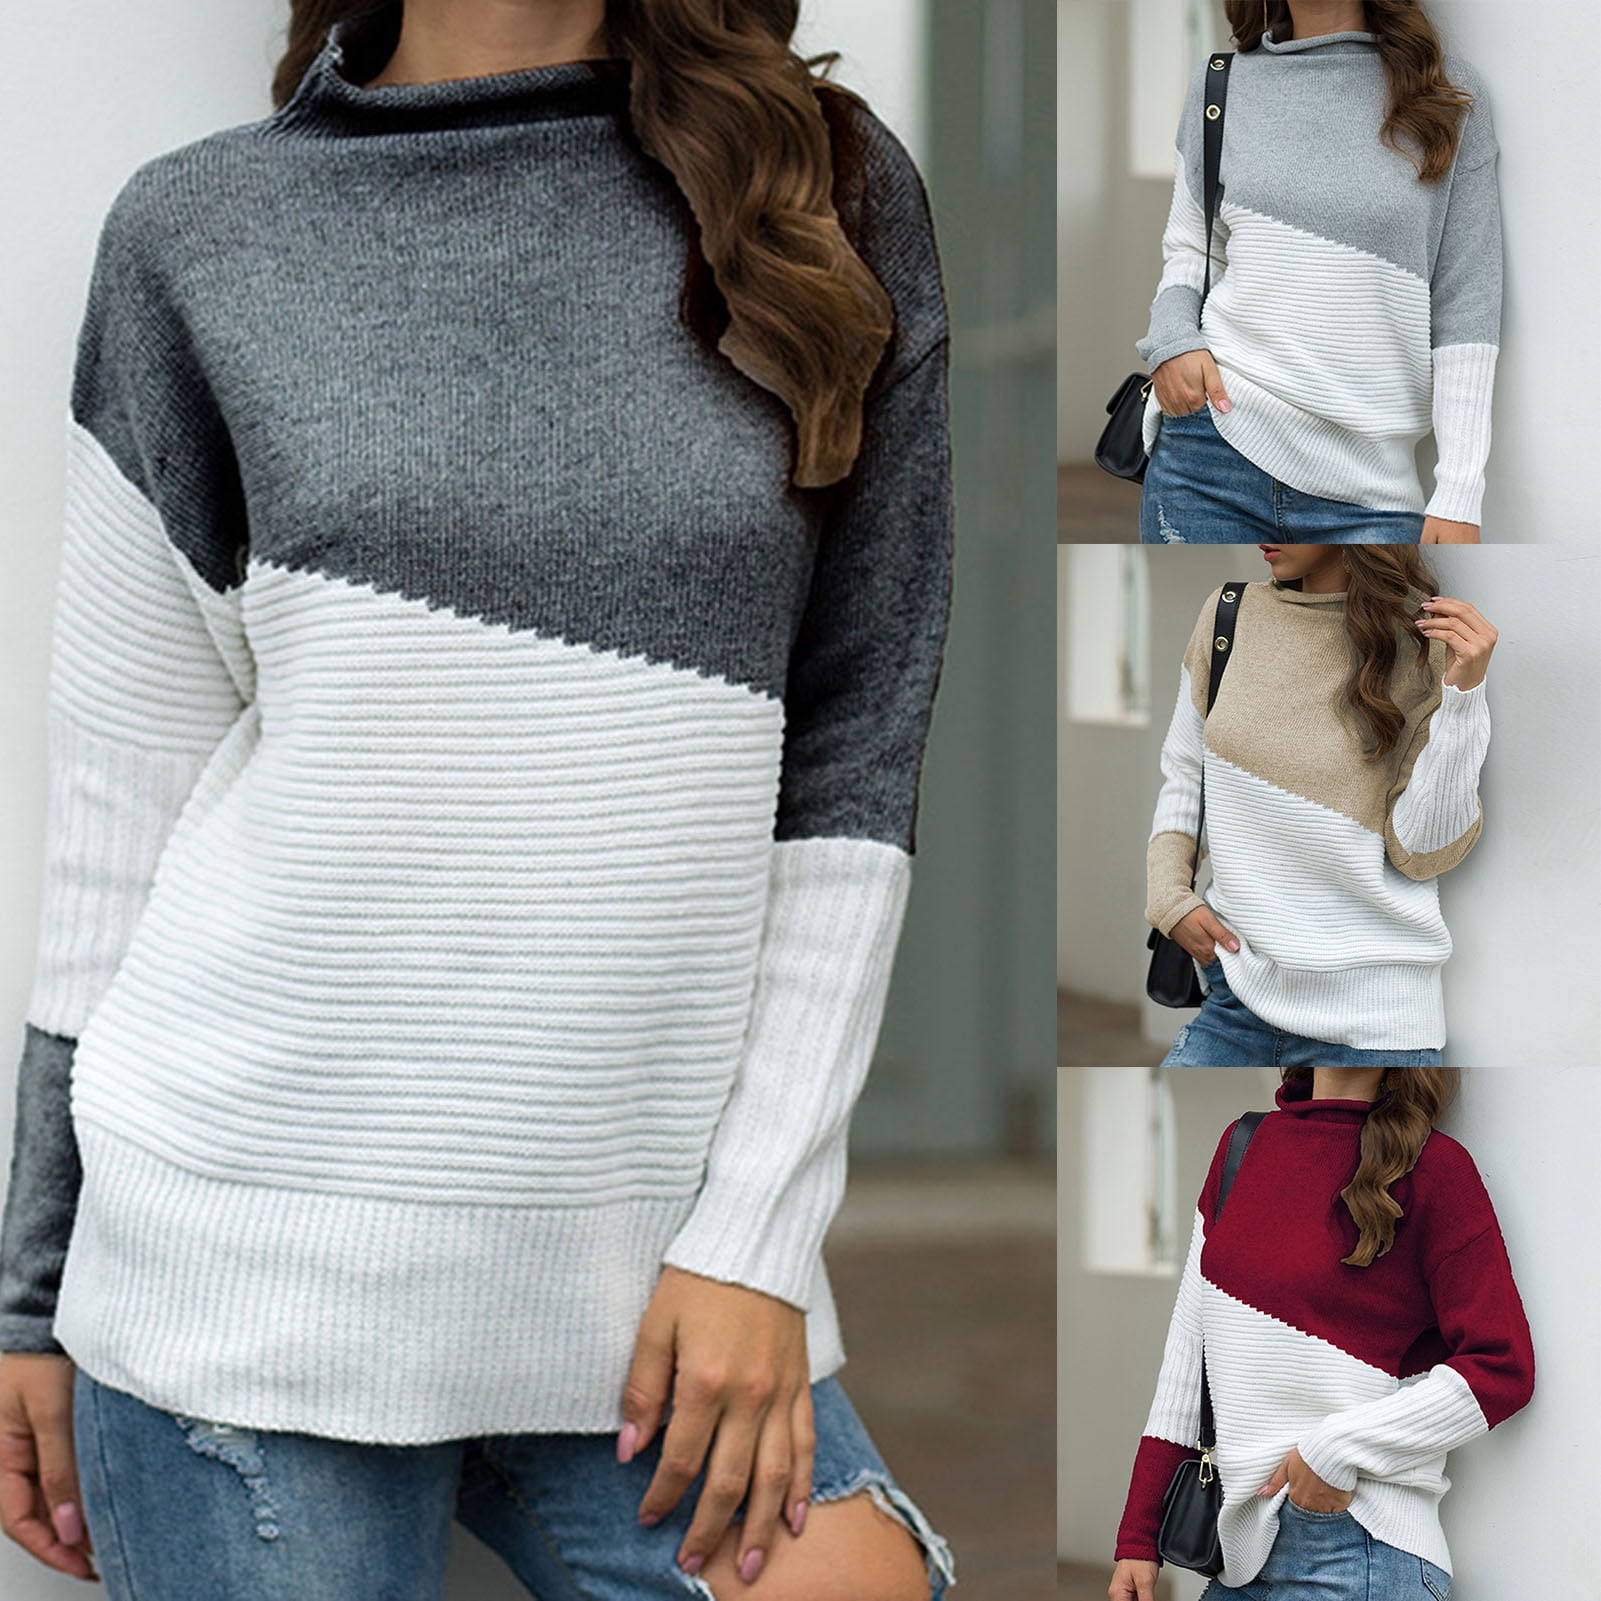 Women Sweaters and Pullovers Autumn Winter Half Lantern Sleeve Sweater Thick Warm Jumper Gray,M